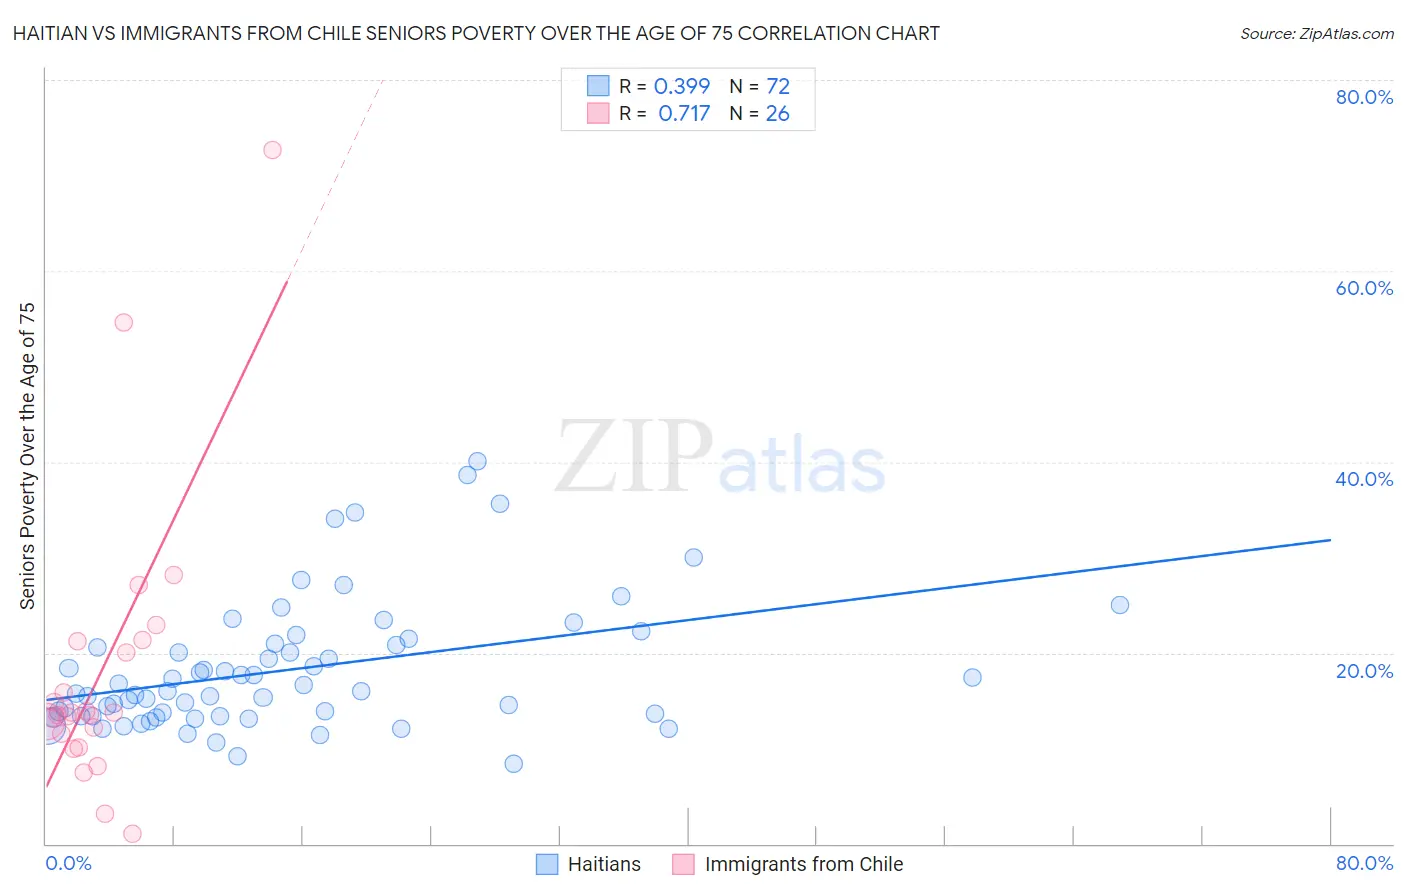 Haitian vs Immigrants from Chile Seniors Poverty Over the Age of 75